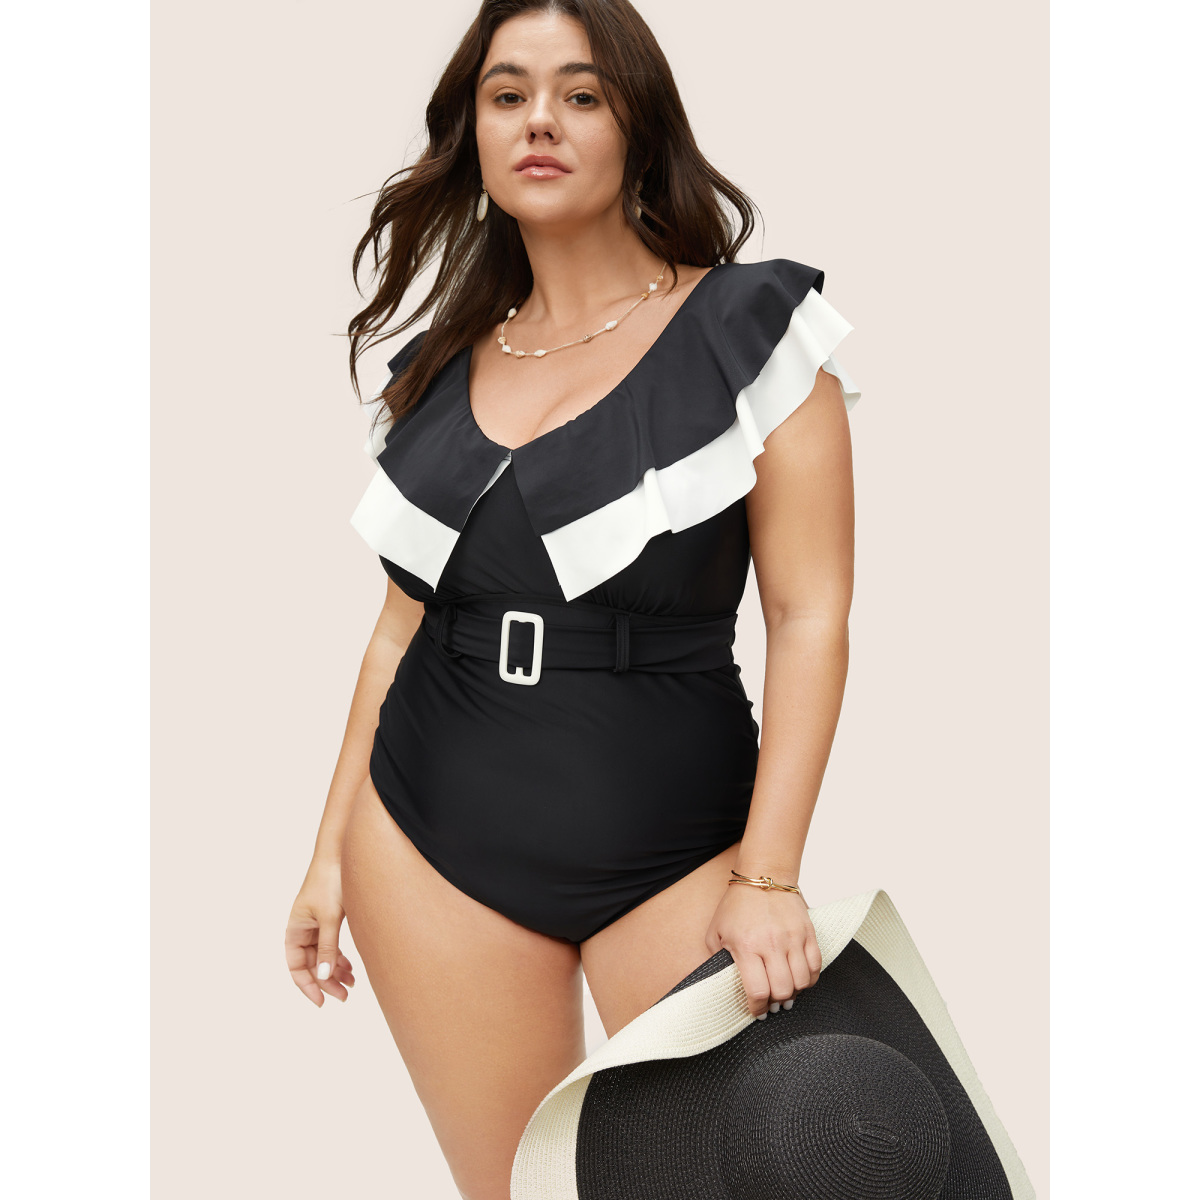 

Plus Size Layered Ruffle Trim Belted One Piece Swimsuit Women's Swimwear Black Beach Ruffles Curve Bathing Suits High stretch One Pieces BloomChic